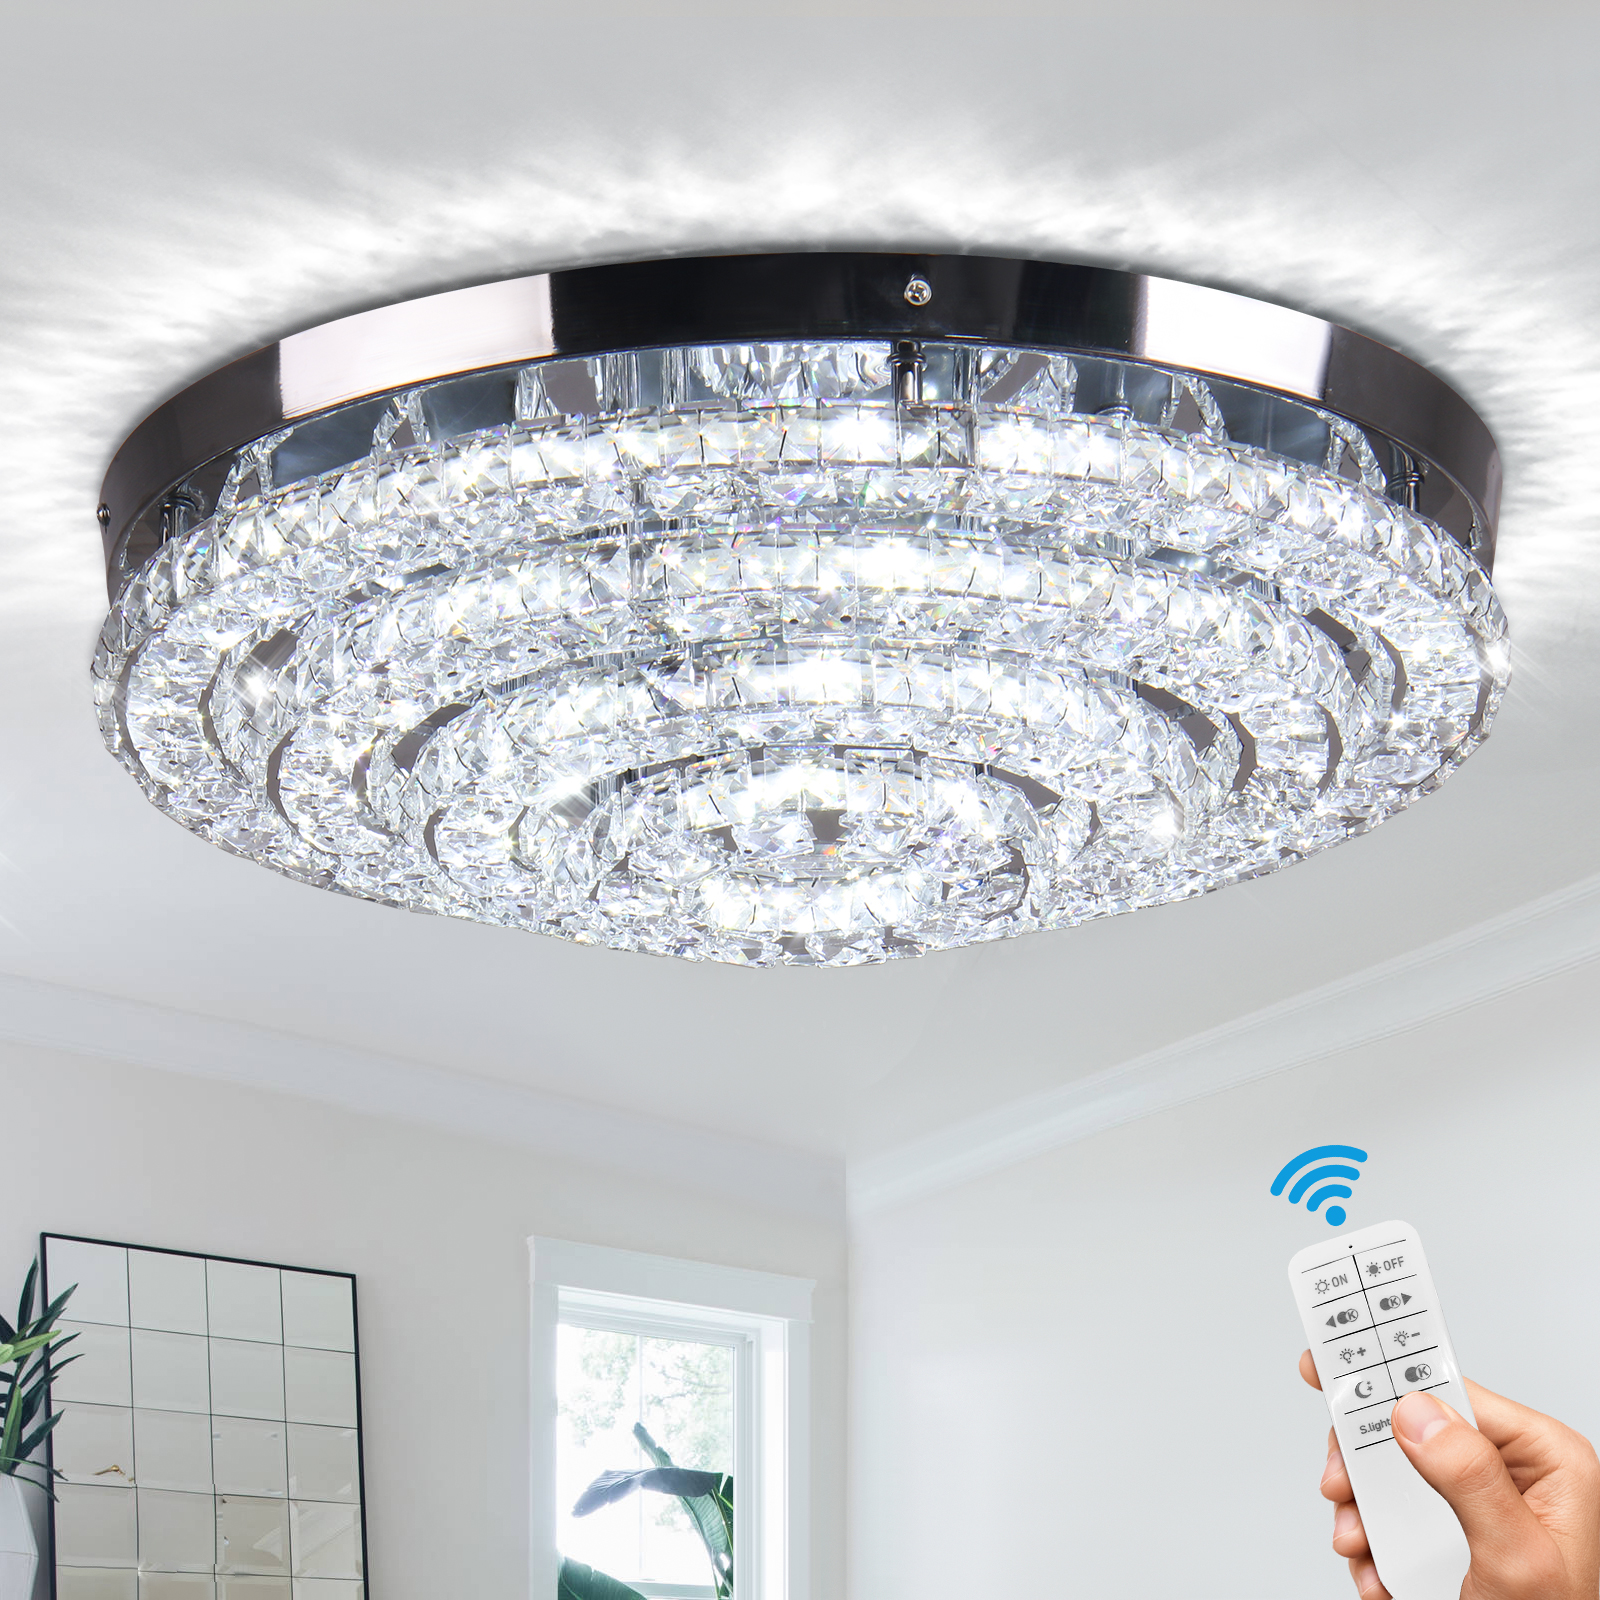 17.7" Crystal Chandelier Ceiling Light Fixture Modern Round Light Fixture Chandeliers for Bedrooms Dining Room Living Room Kitchen with Remote Control (Dimmable)